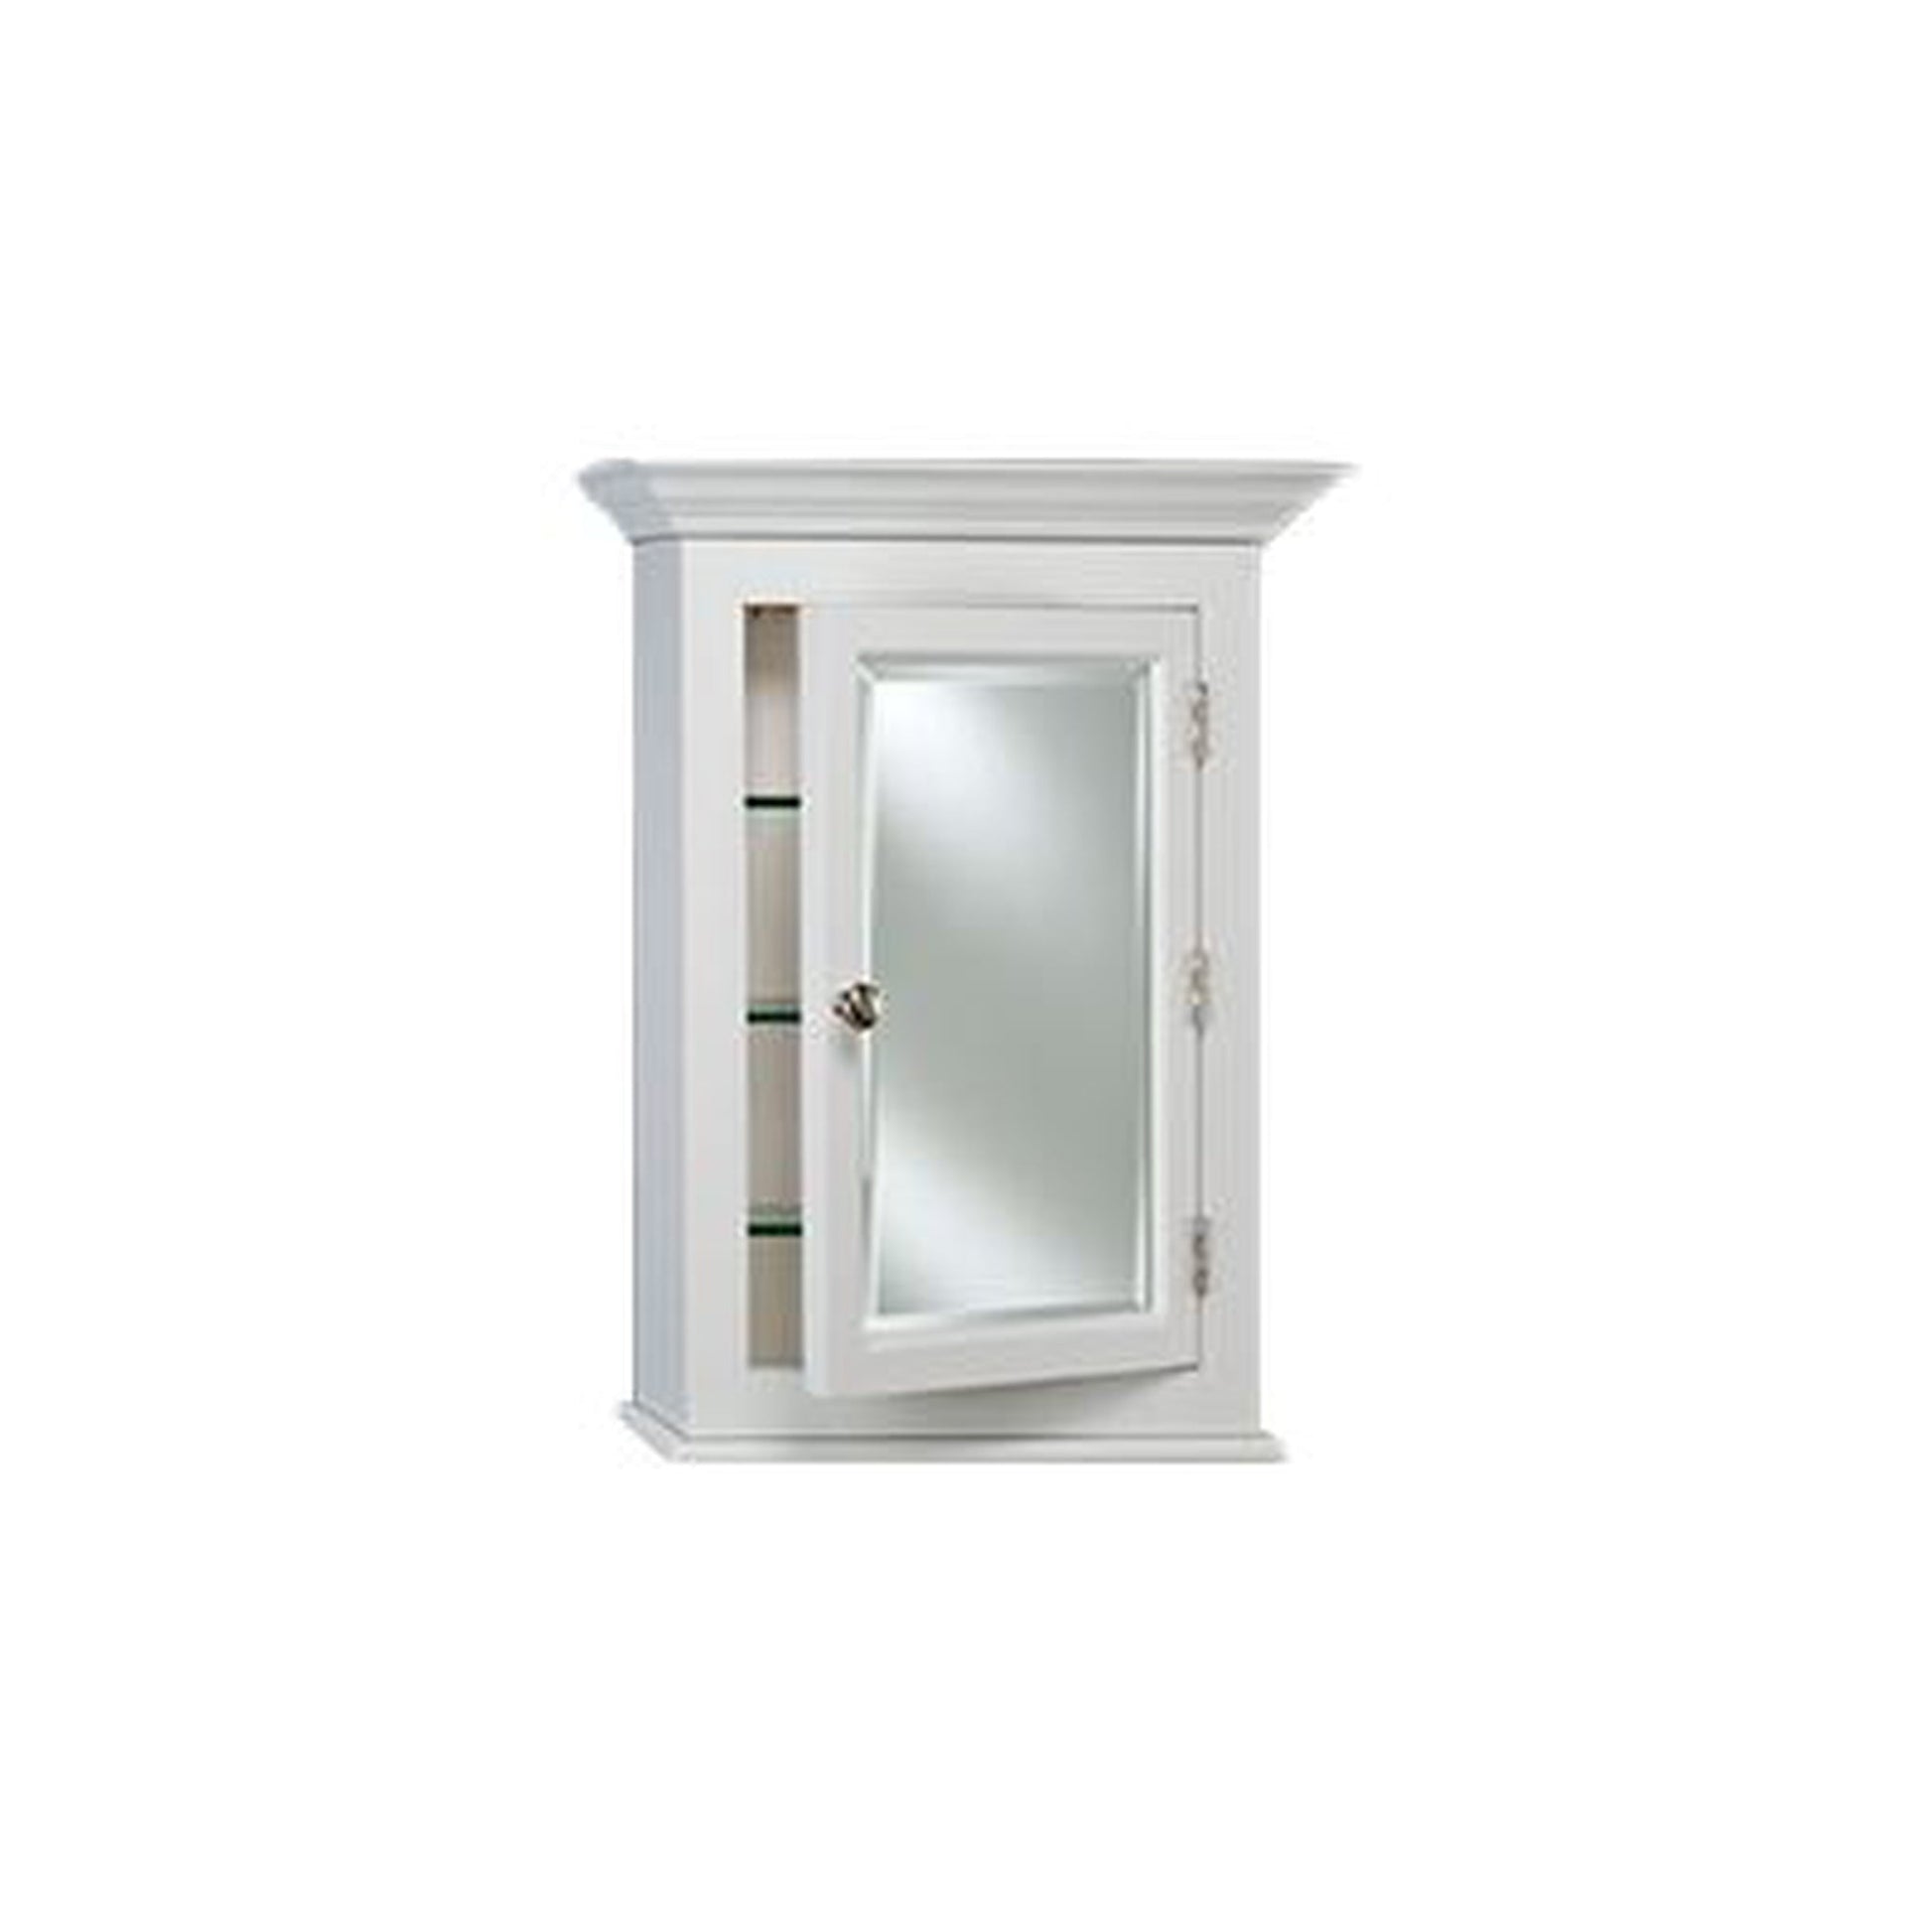 https://usbathstore.com/cdn/shop/products/Afina-Wilshire-I-Small-White-Surface-Mount-Right-Hinged-Single-Door-Medicine-Cabinet-With-Beveled-Edge-Mirror.jpg?v=1675783295&width=1946